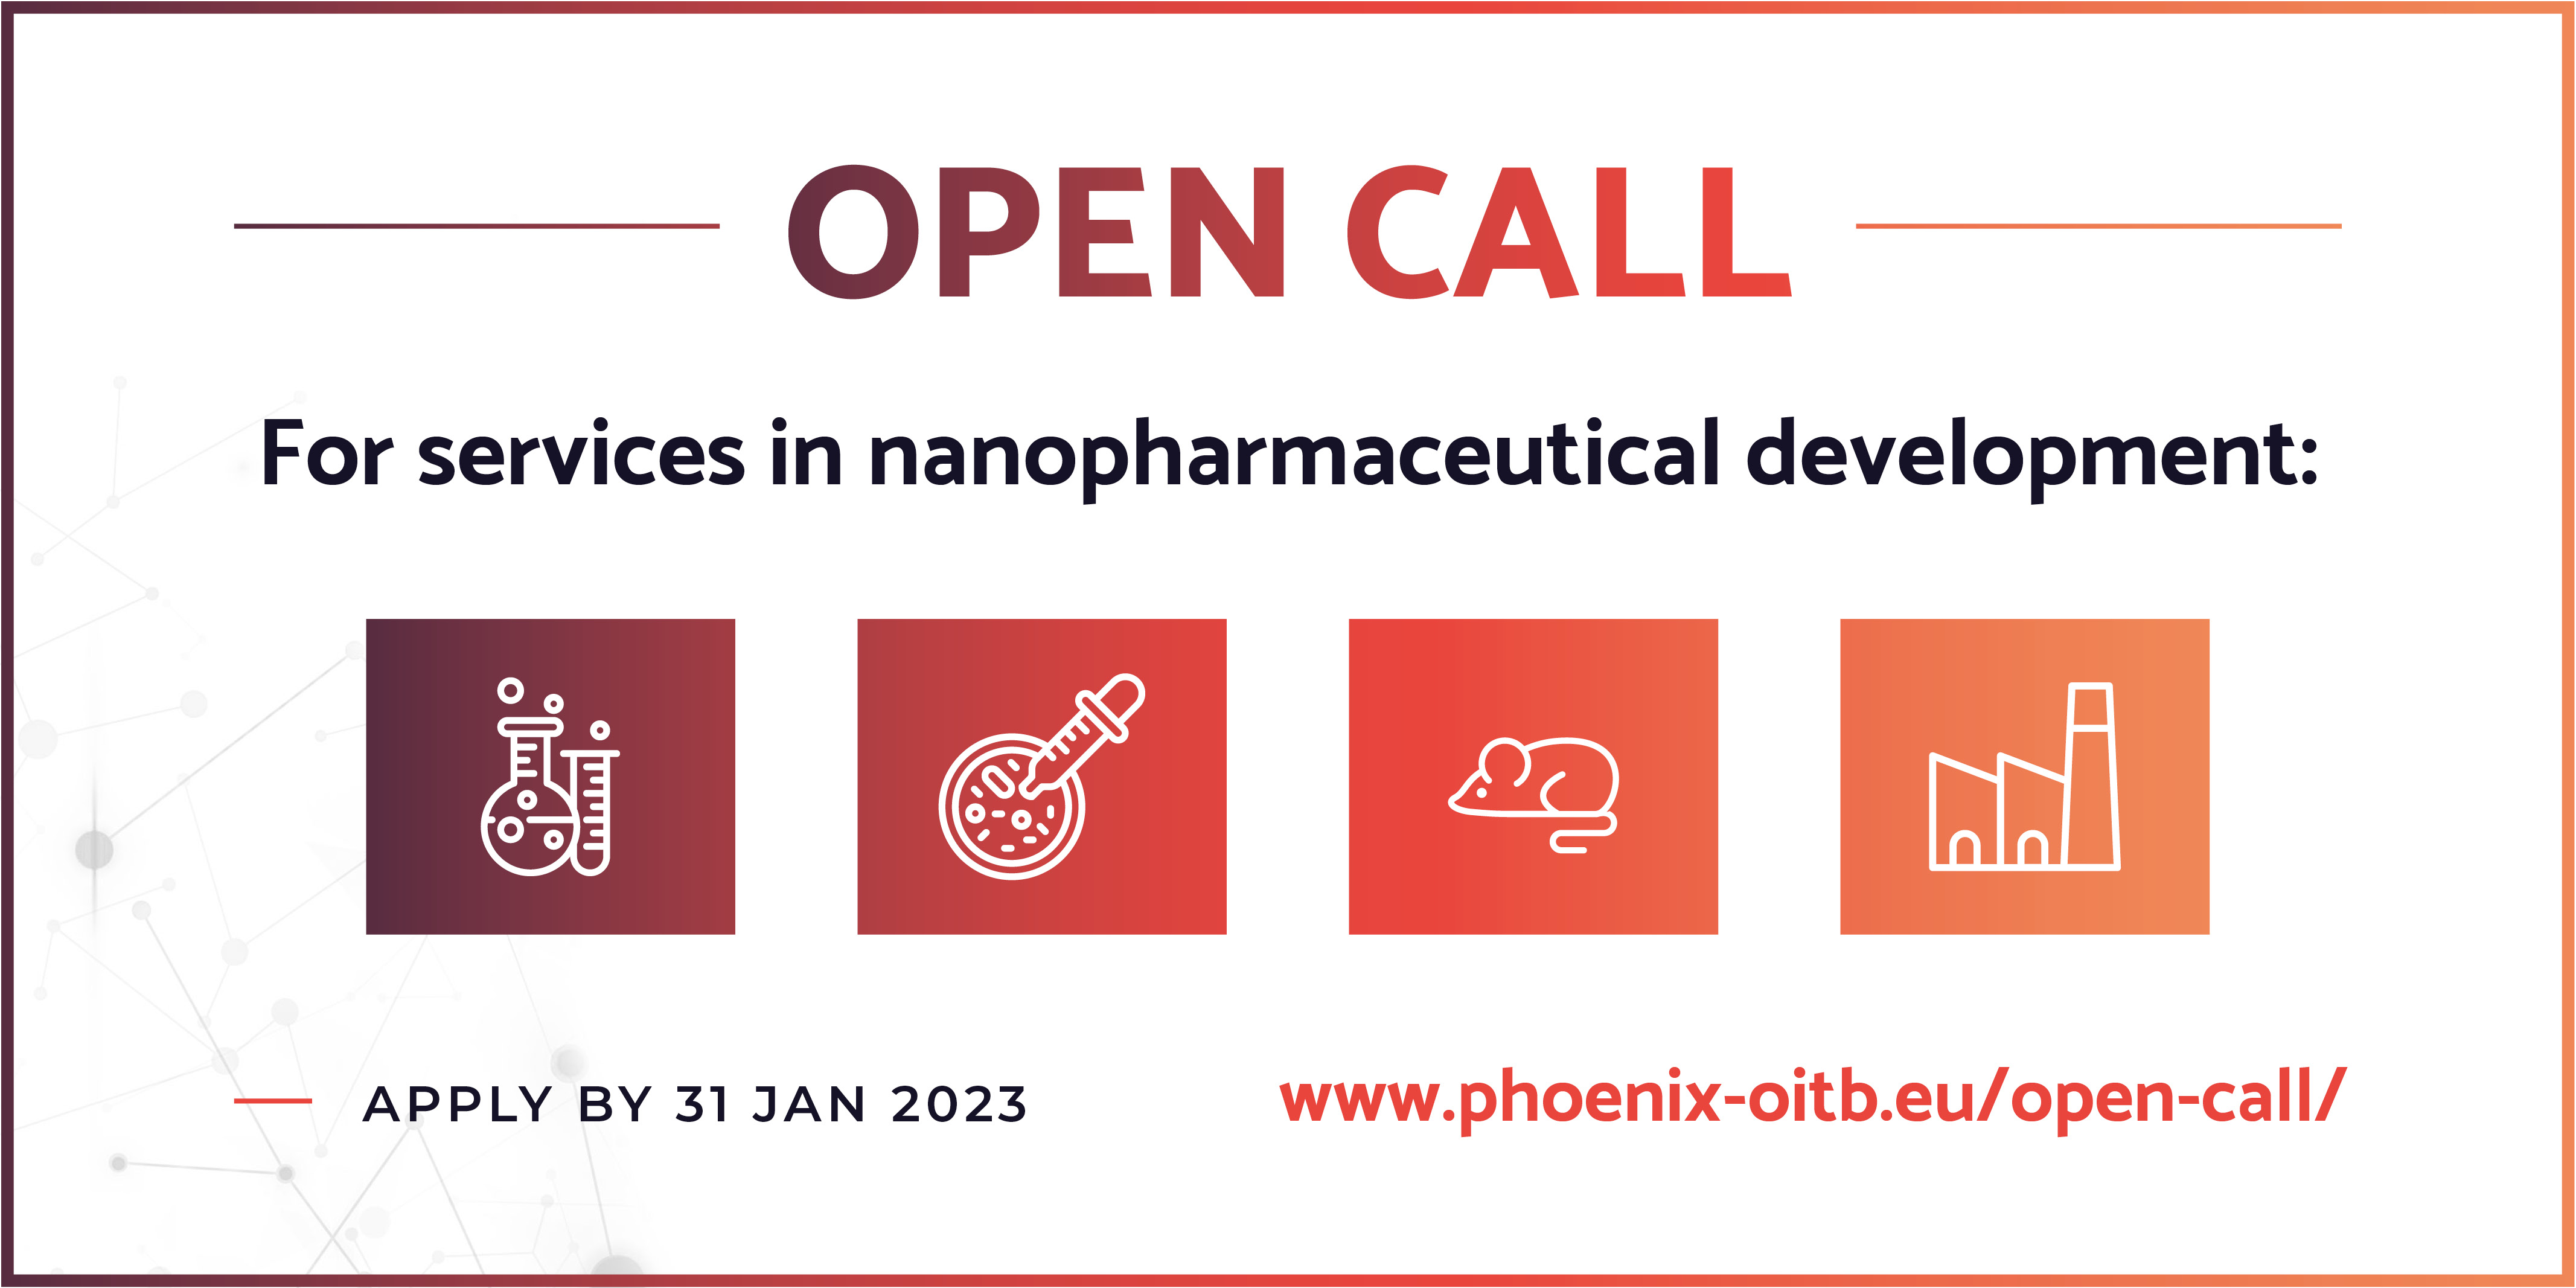 PHOENIX-OITB Launches Open Call Offering Funded Services in Nanopharmaceutical Development